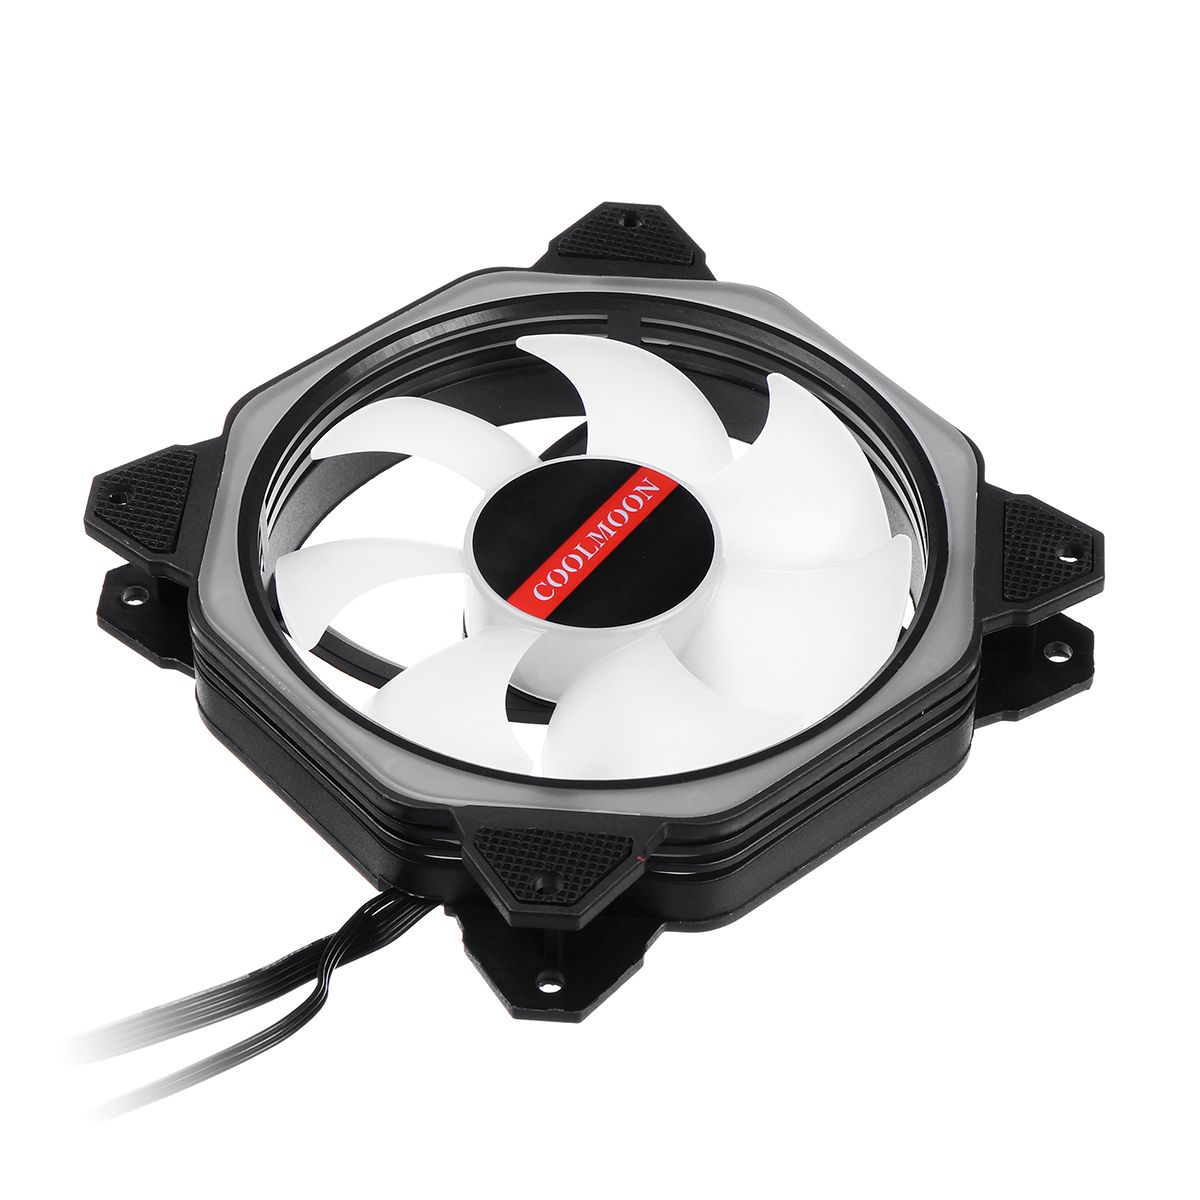 6-Pin-121225cm--RGB-Colorful-LED-Cooling-Fan-for-Computer-Case-1531112